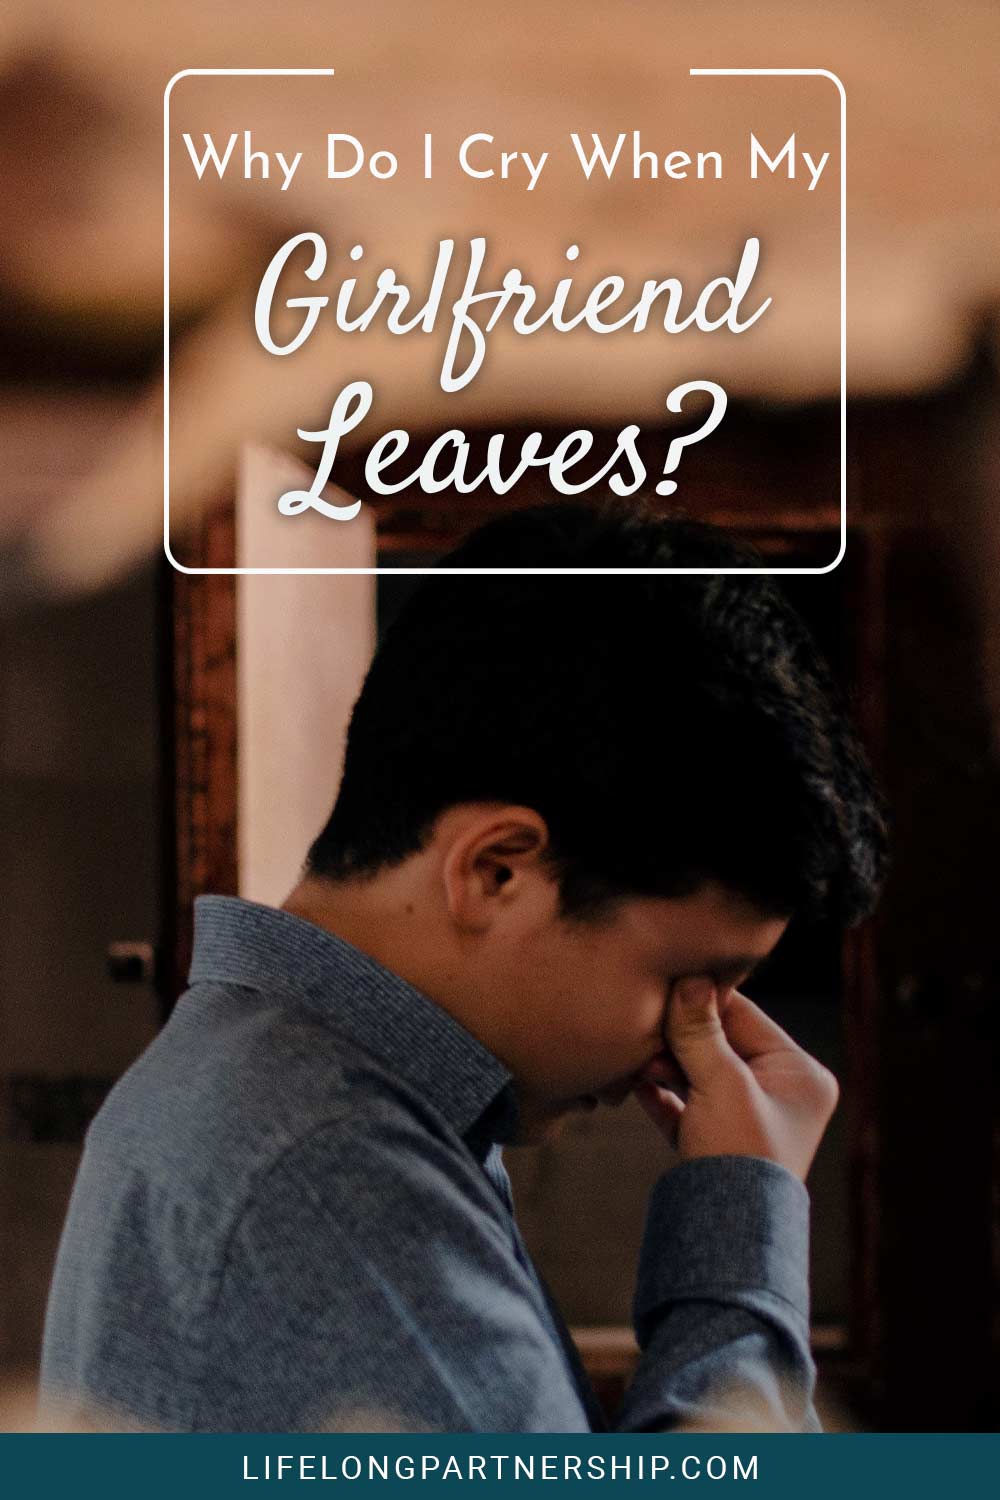 Man in grey shirt crying - Why Do I Cry When My Girlfriend Leaves?